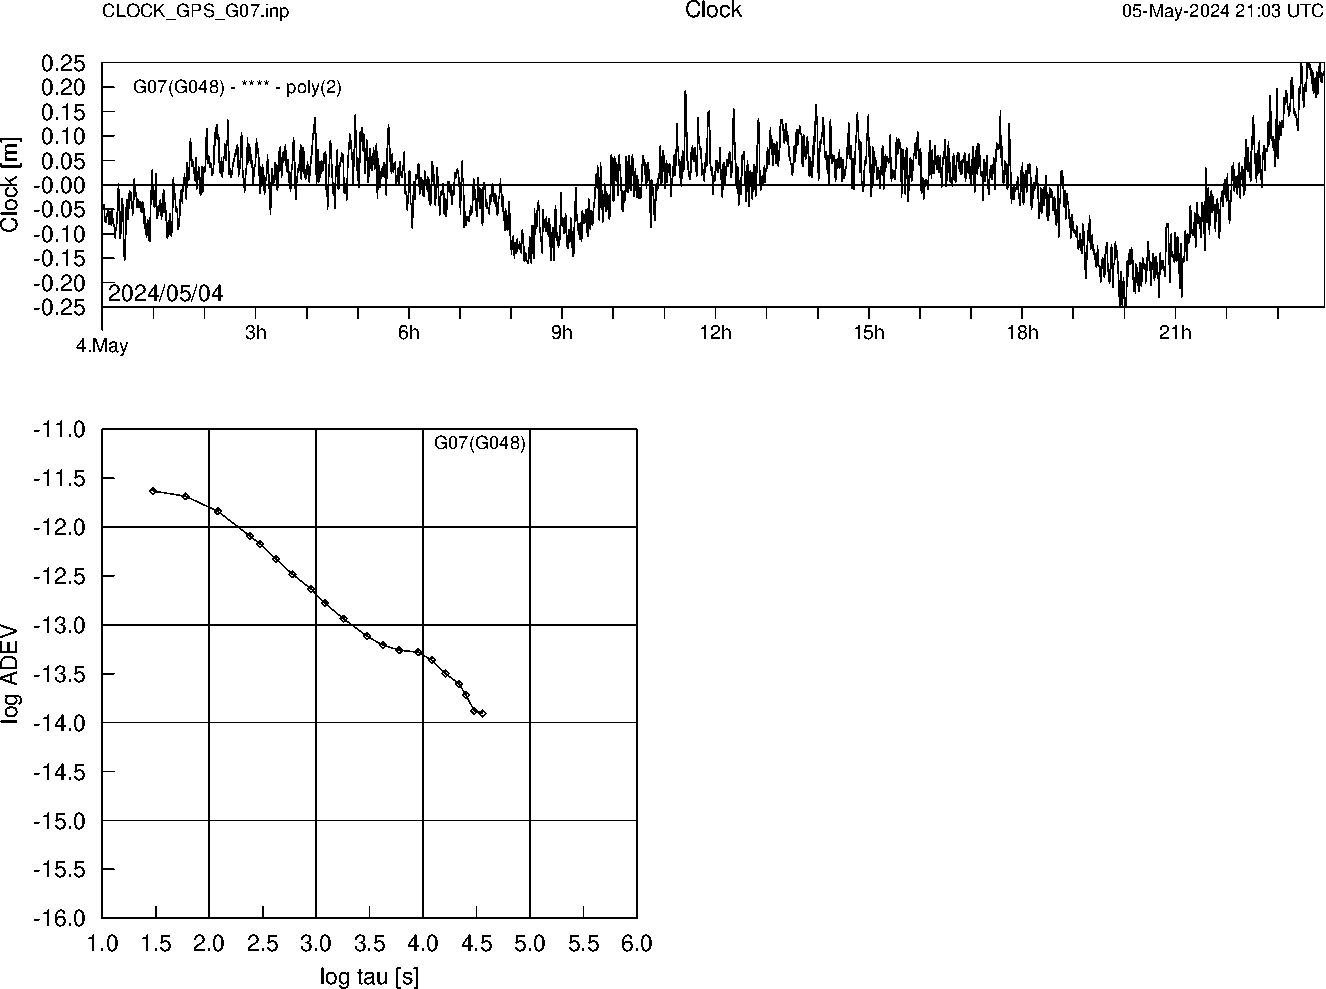 GPS G07 Clock Time Series and Allan Deviation